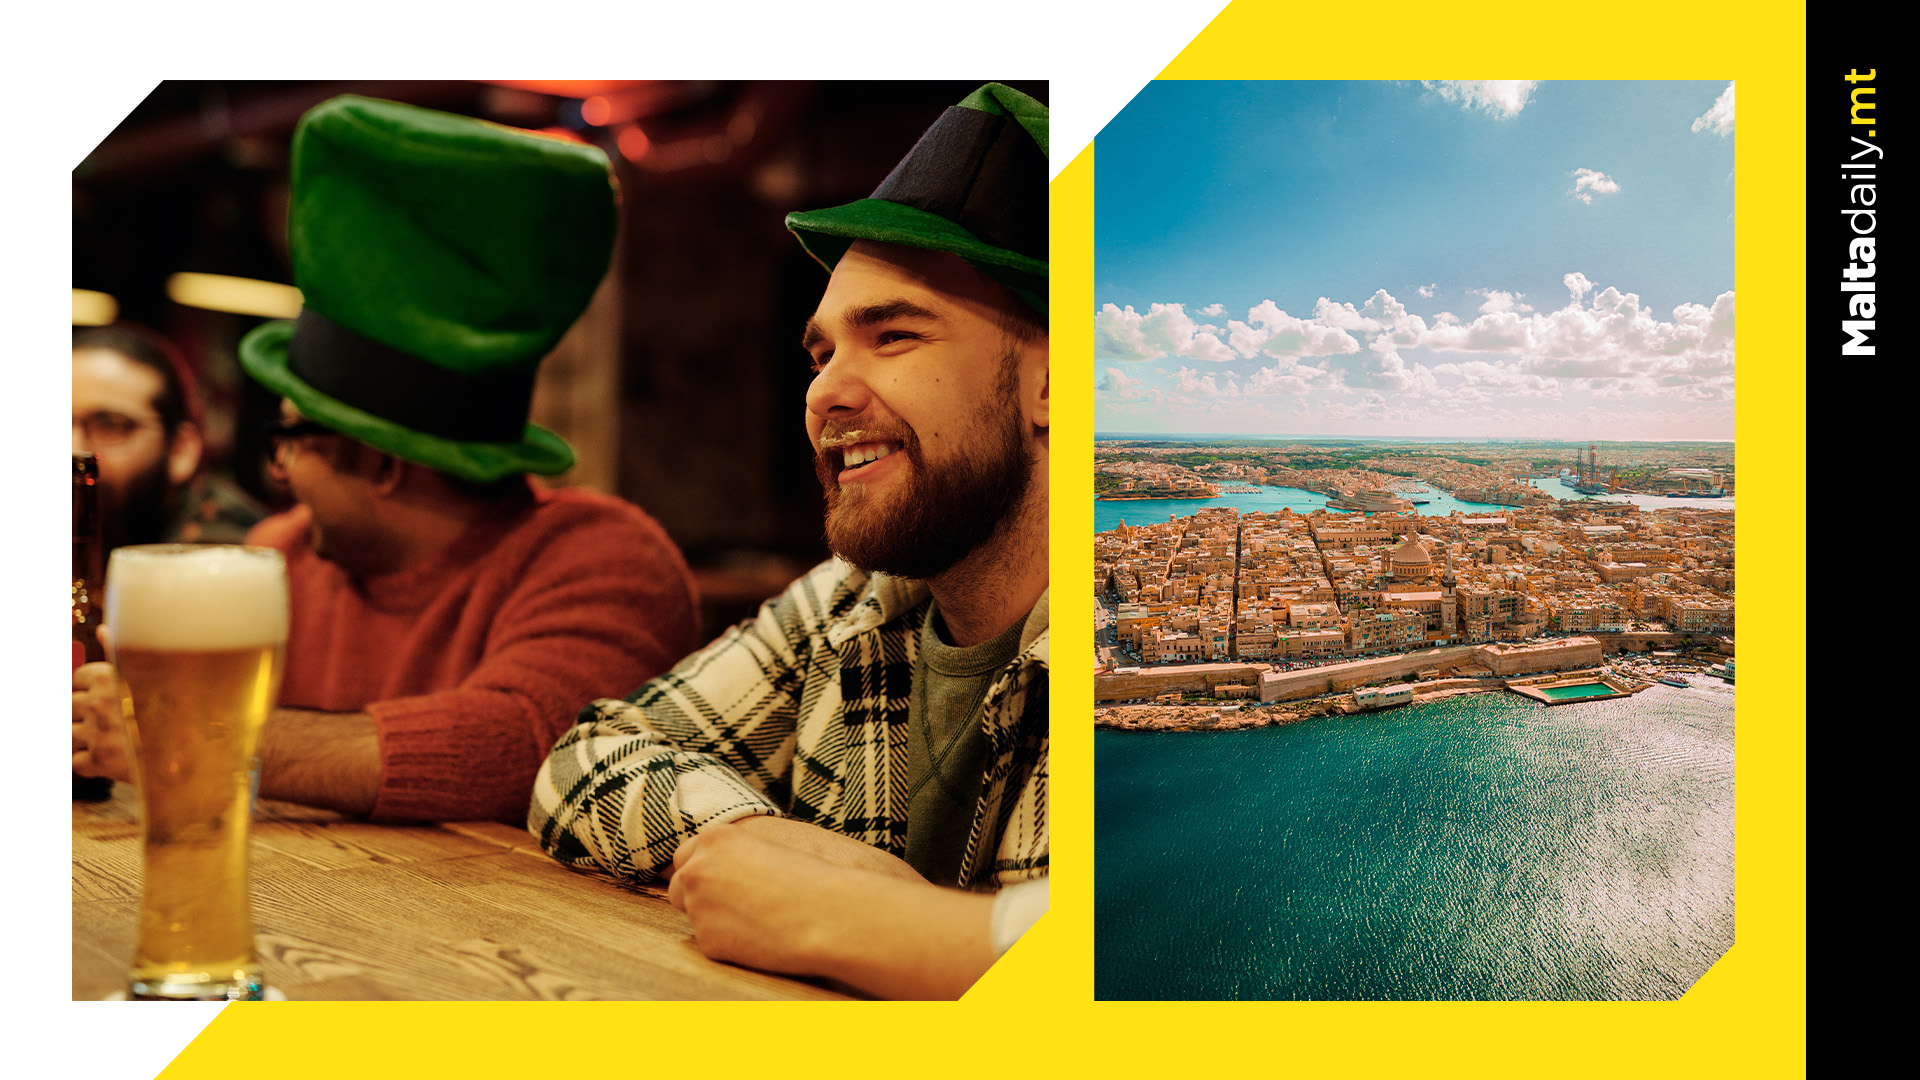 Luck of the Irish! St. Patrick's celebrations in Malta to enjoy 'Mainly Sunny' weather